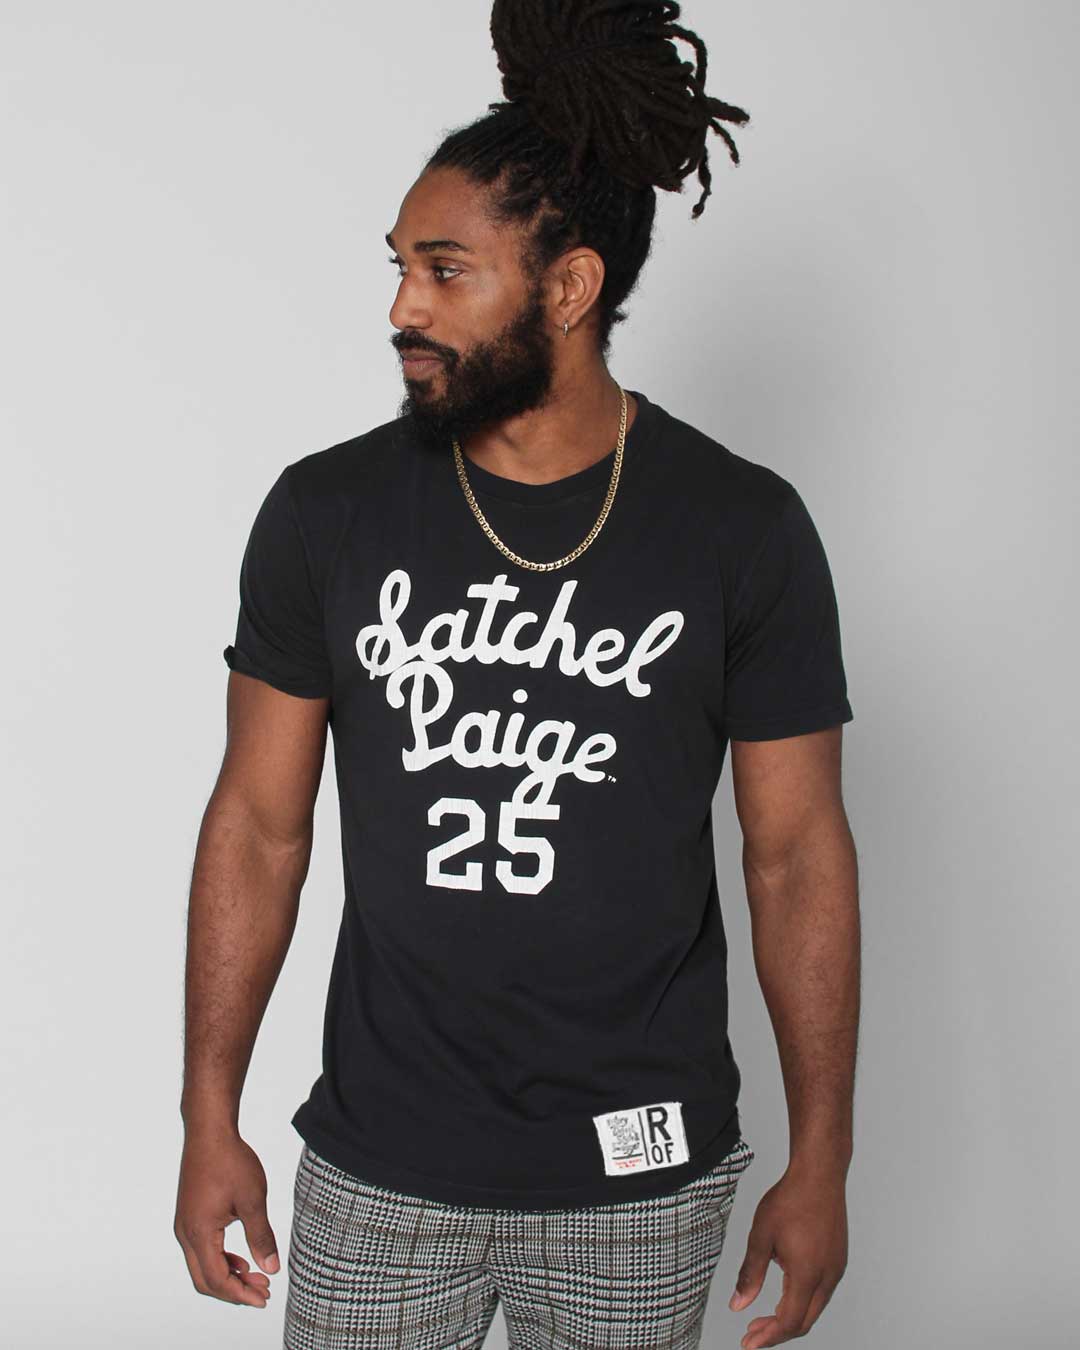 Satchel Paige 25 Tee - Roots of Fight